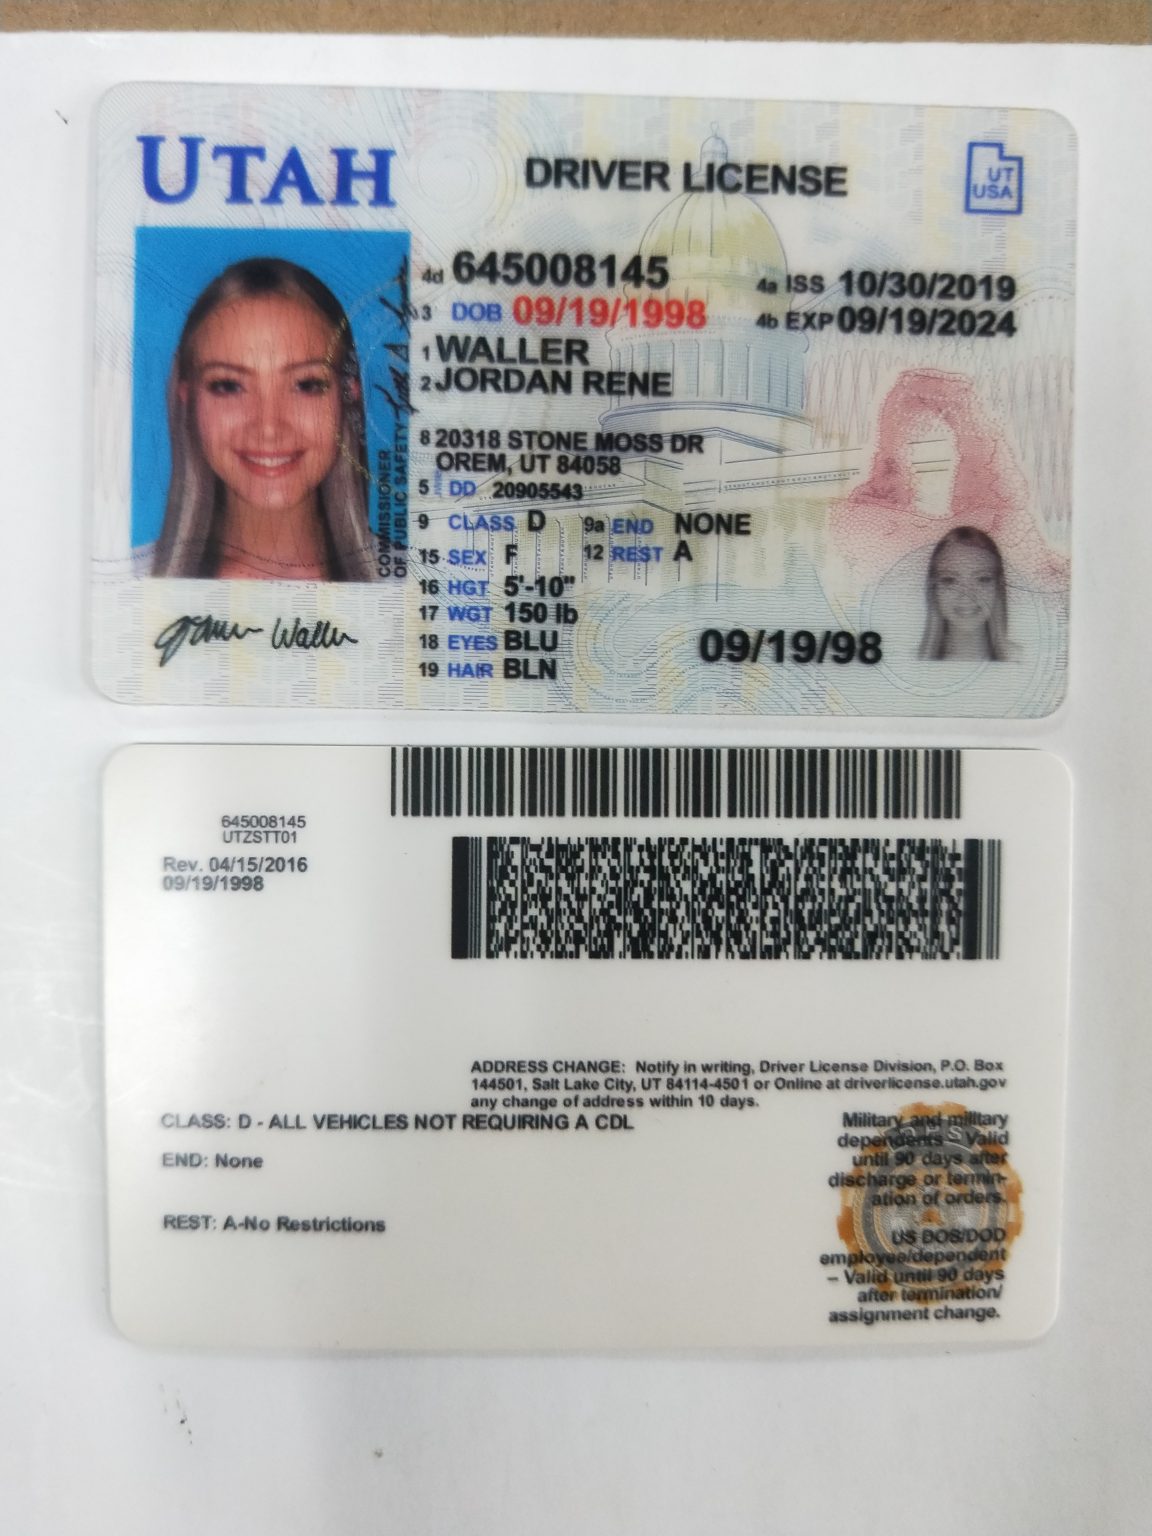 6 Methods To Internet Privacy Using Fake ID Without Breaking Your Bank ...